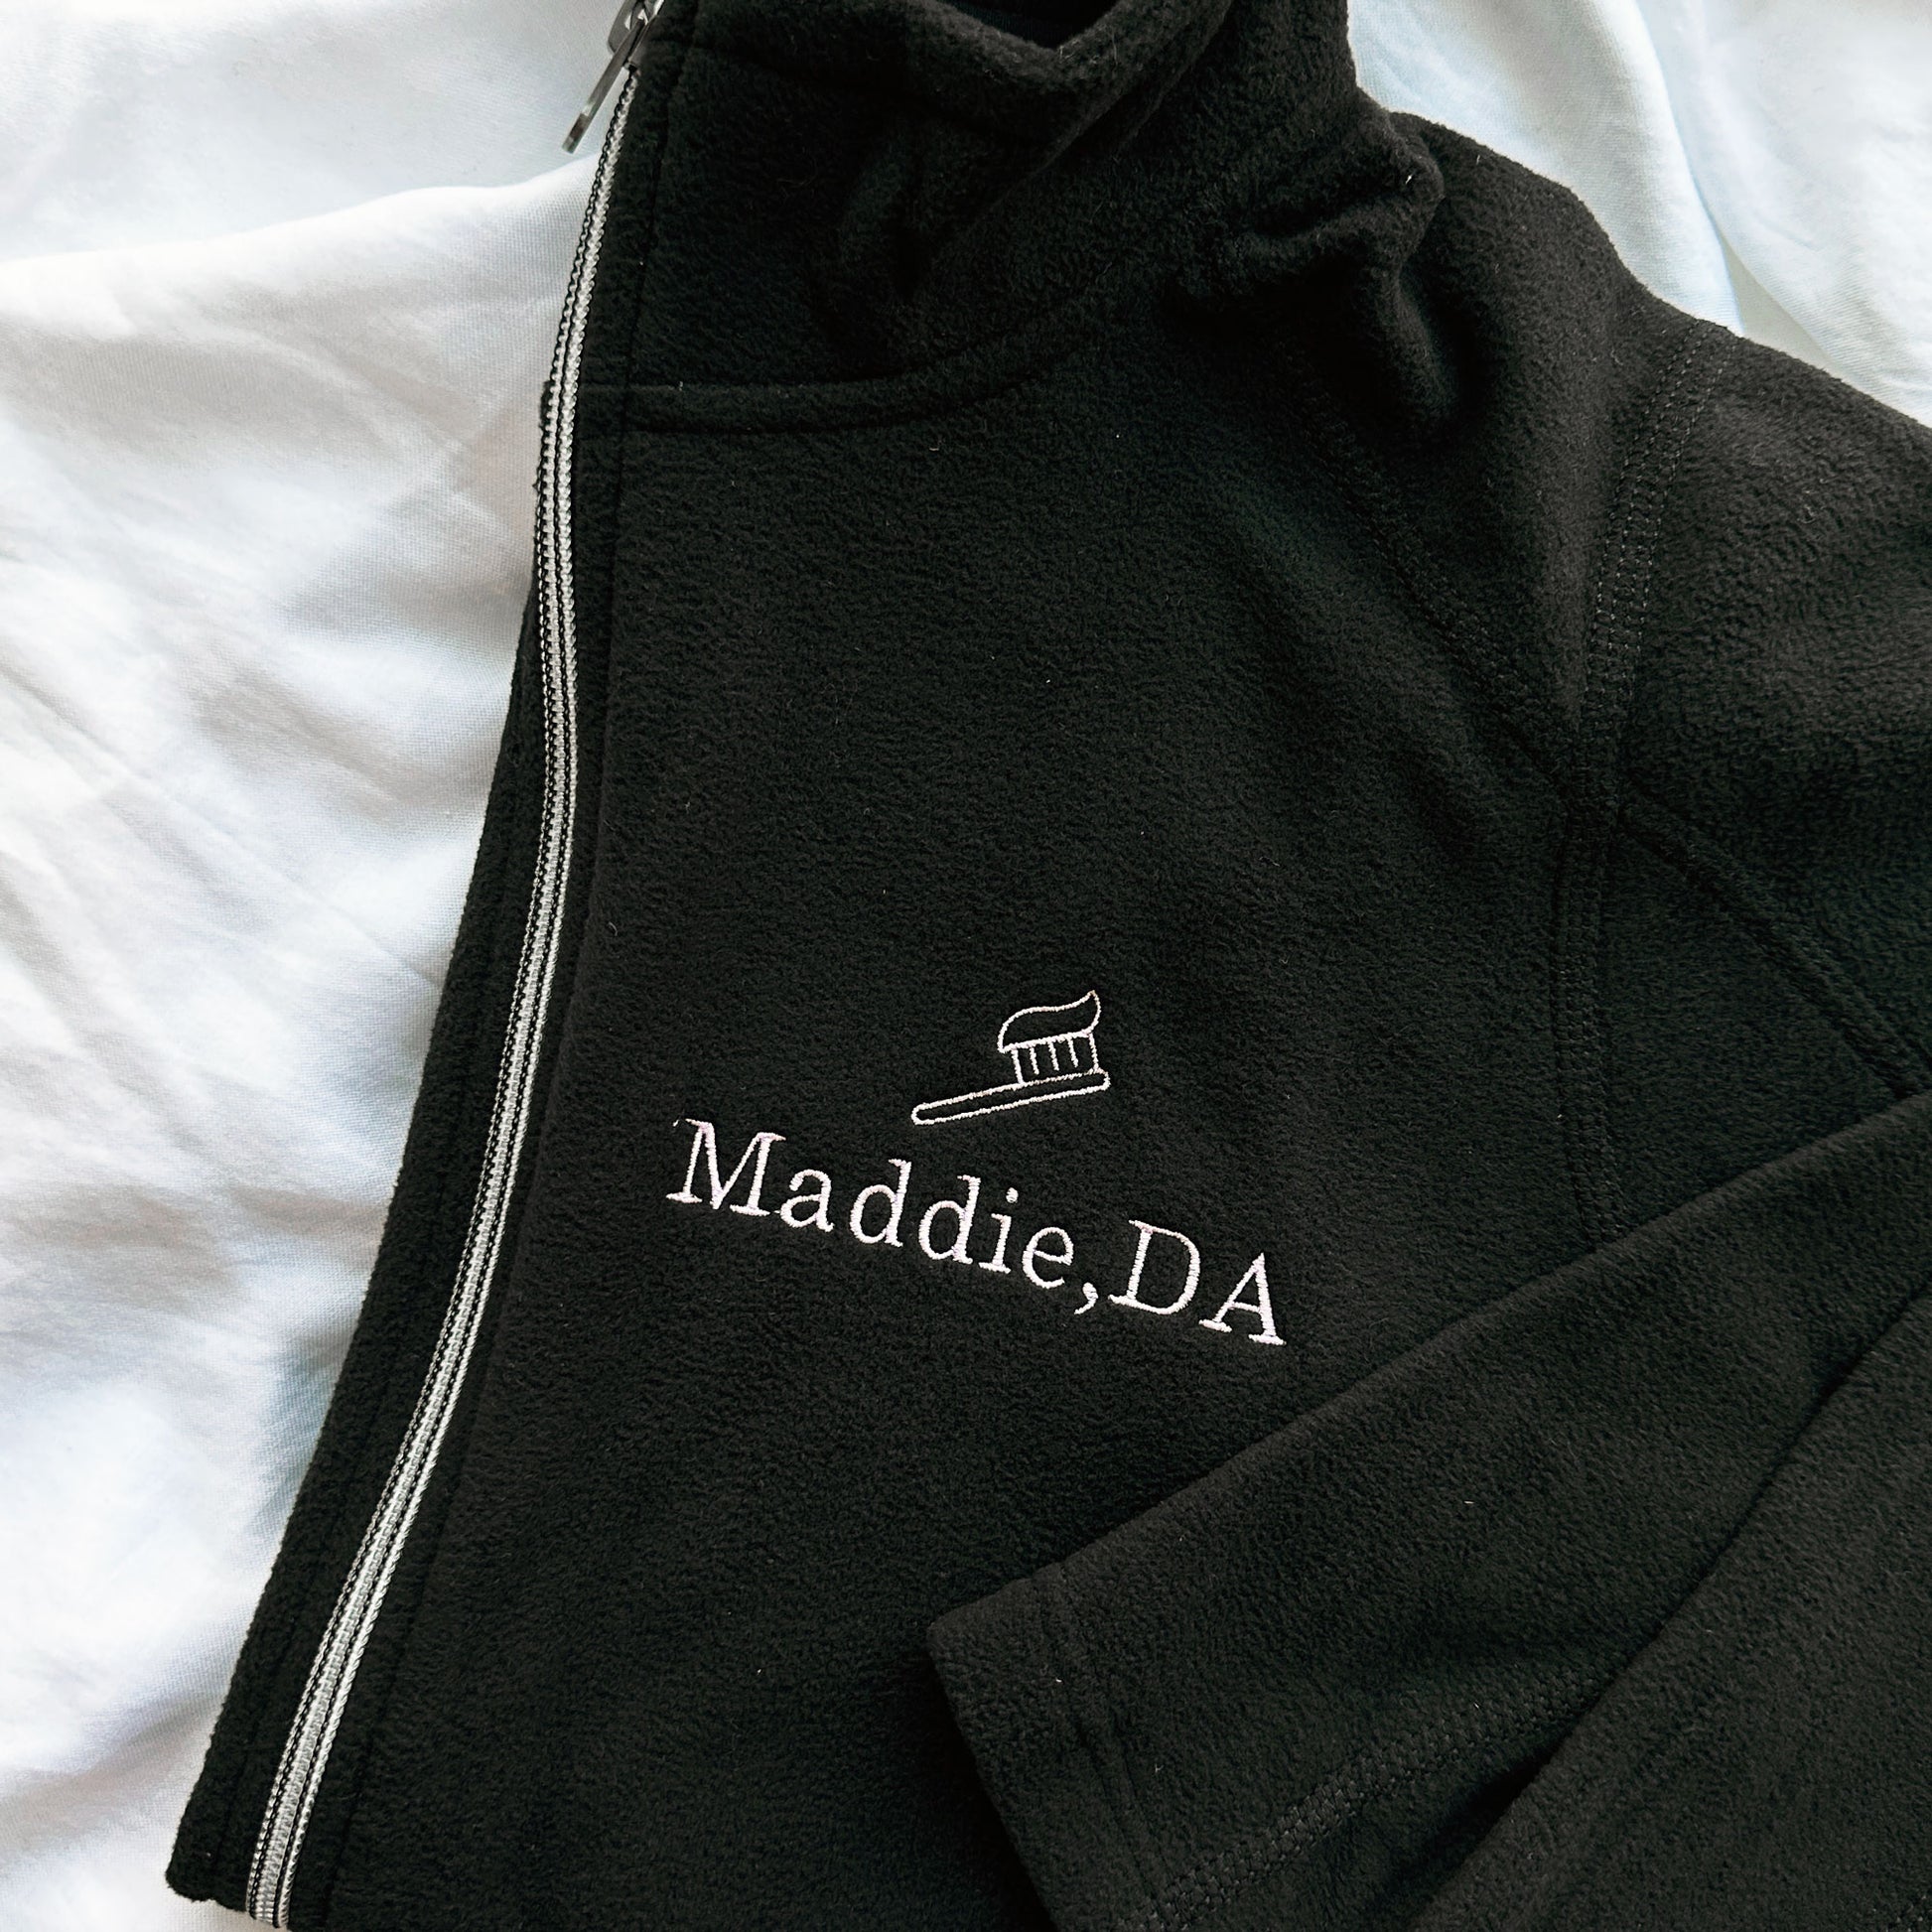 close up of a full zip fleece black jacket with mini embroidered toothbrush outline and name Maddie DA in lilac thread on the left chest